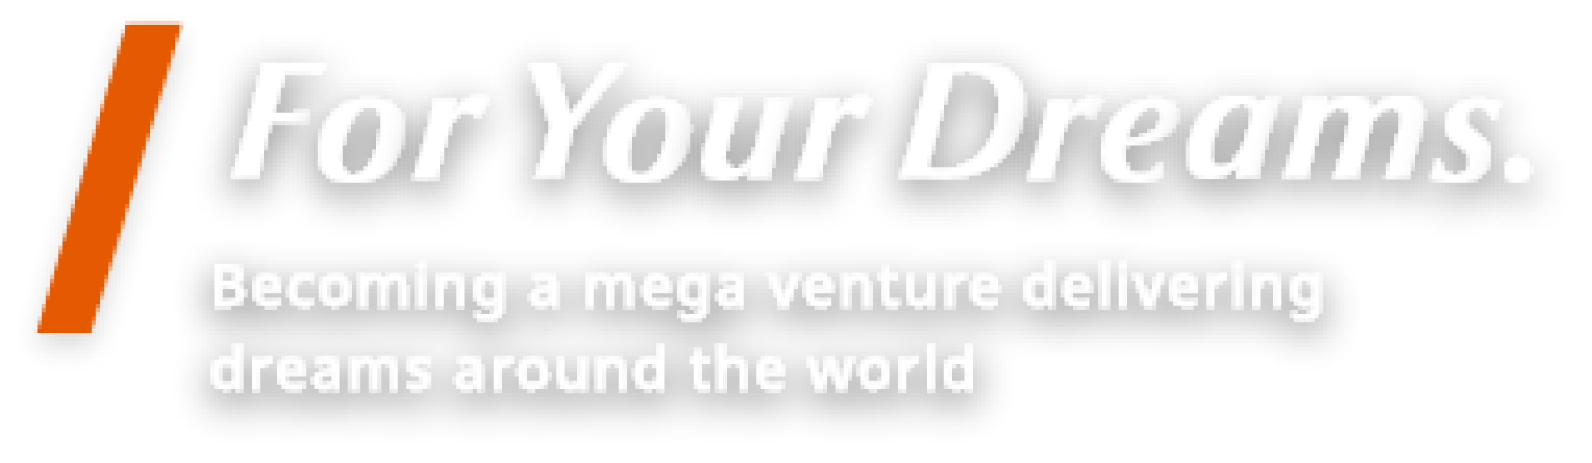 For Your Dreams. Becoming a mega venture delivering dreams around the world